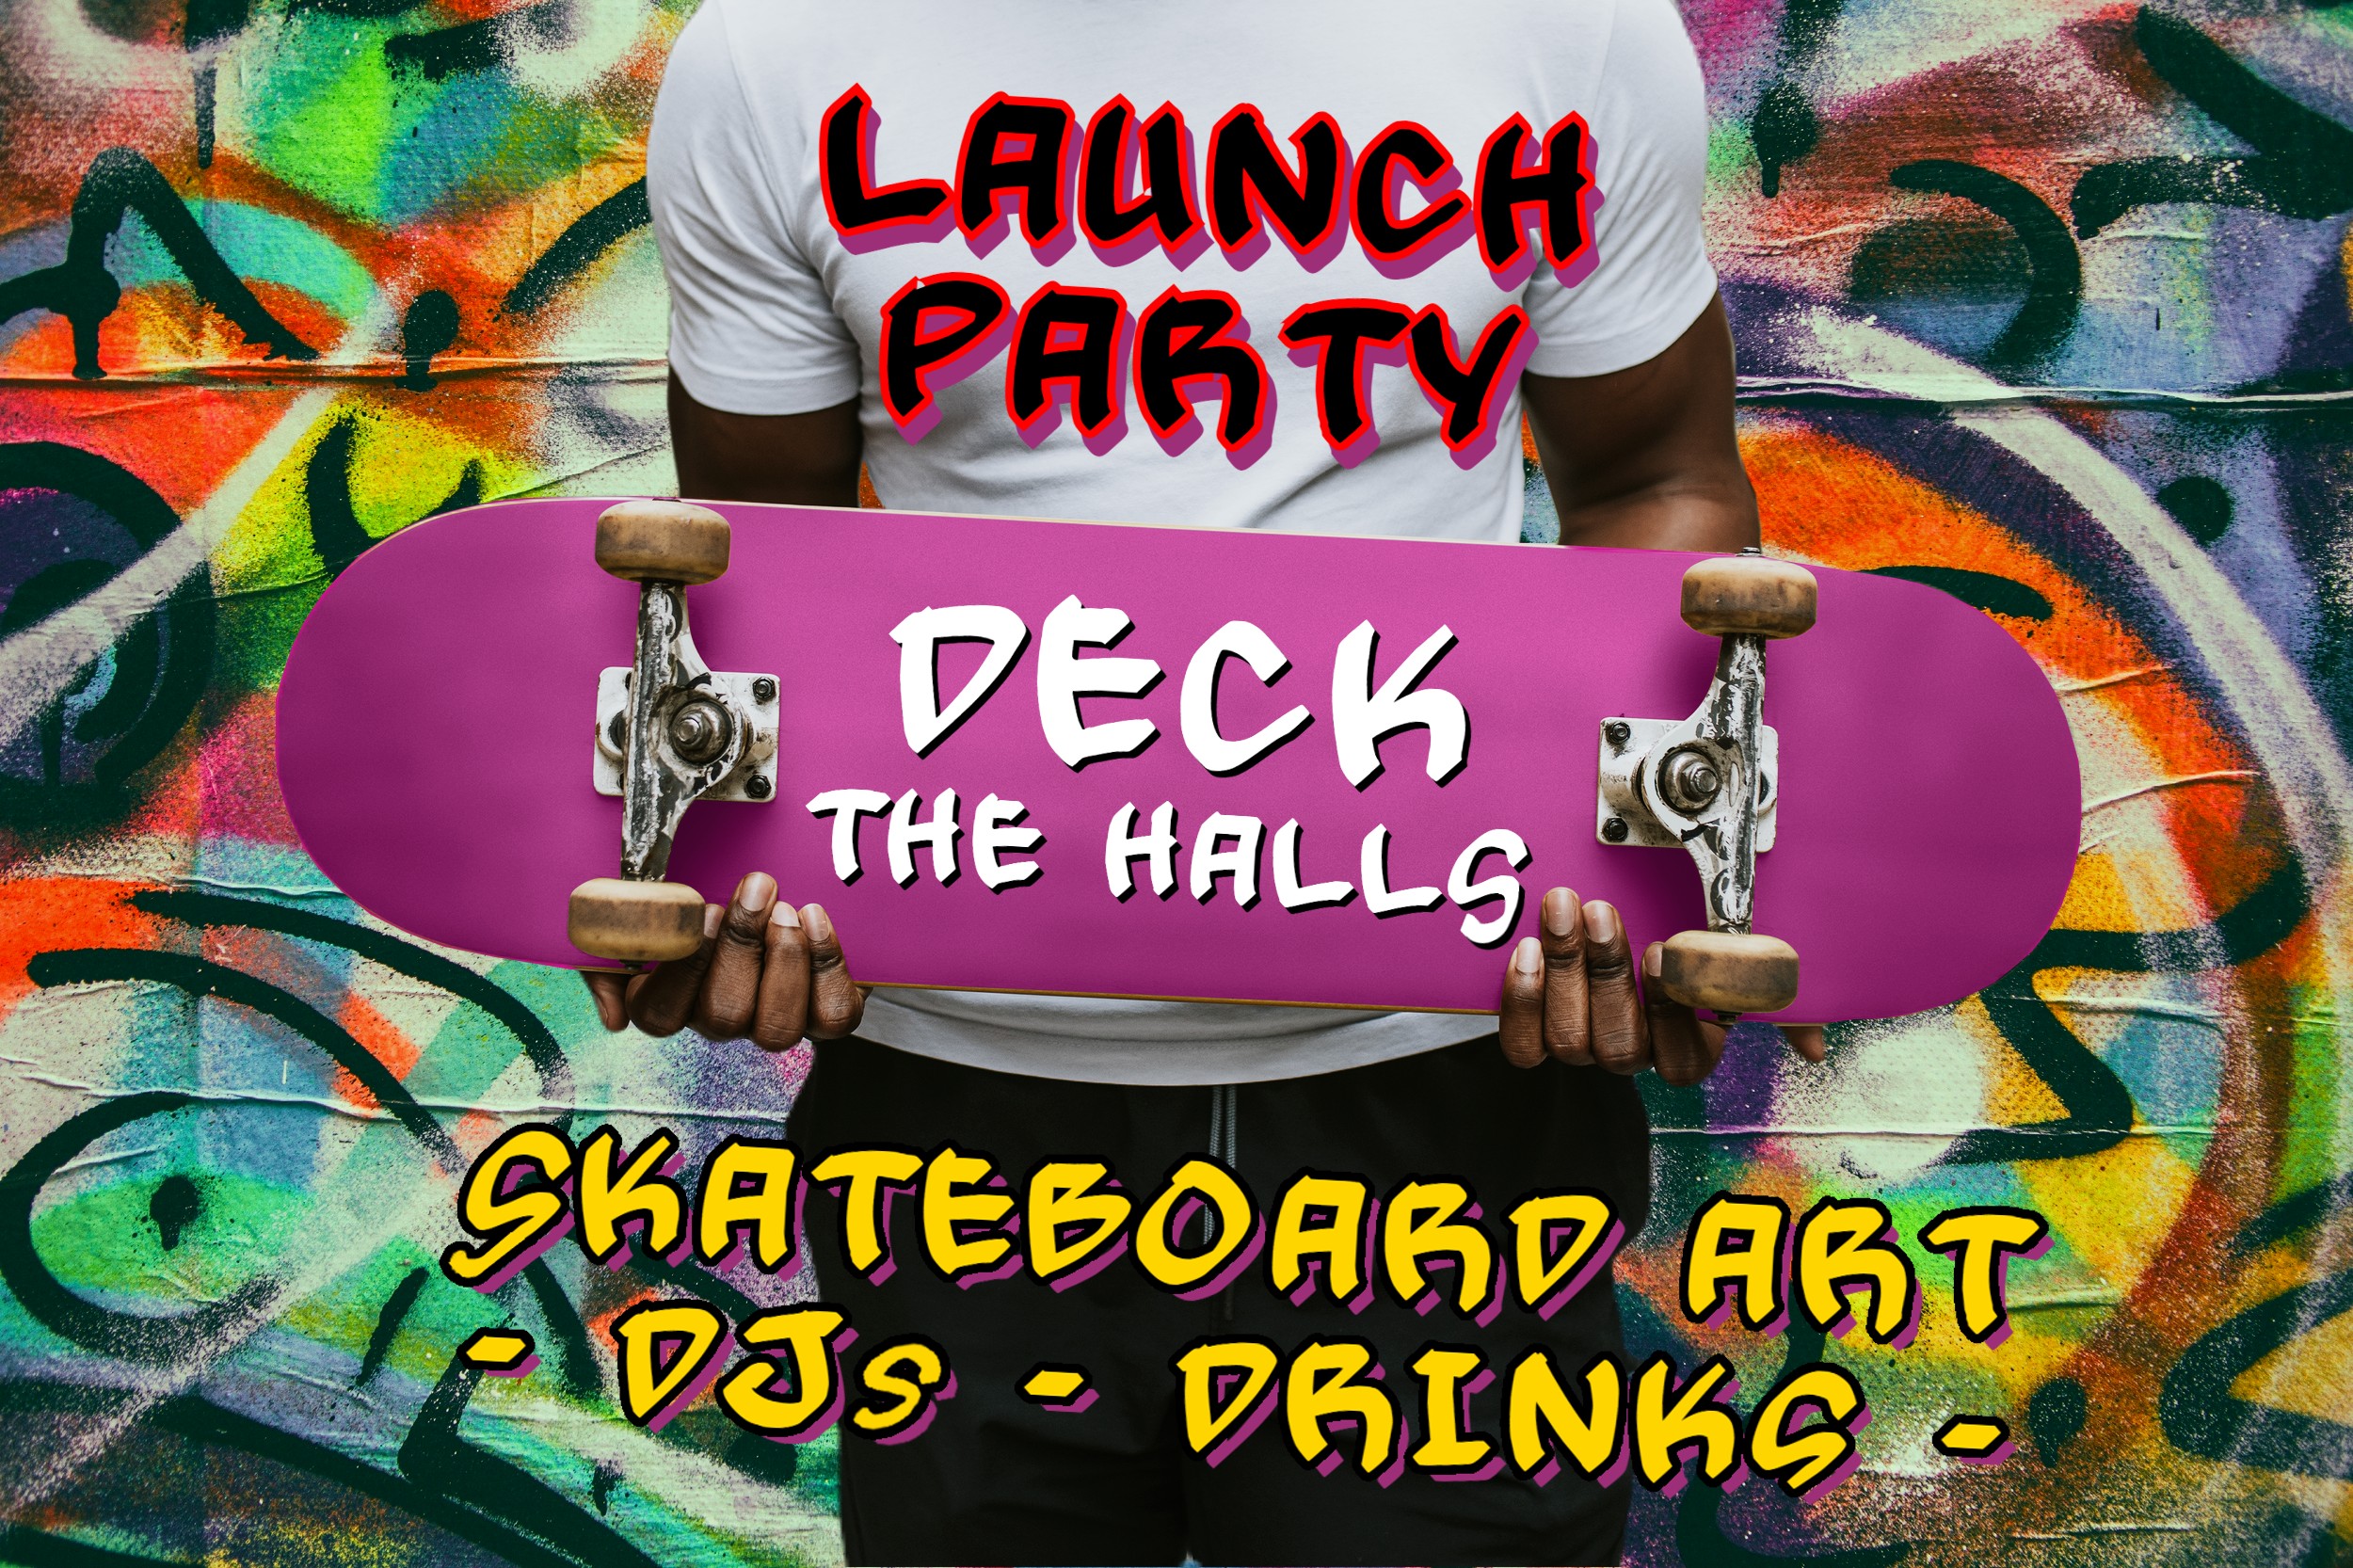 Deck The Halls: LAUNCH PARTY